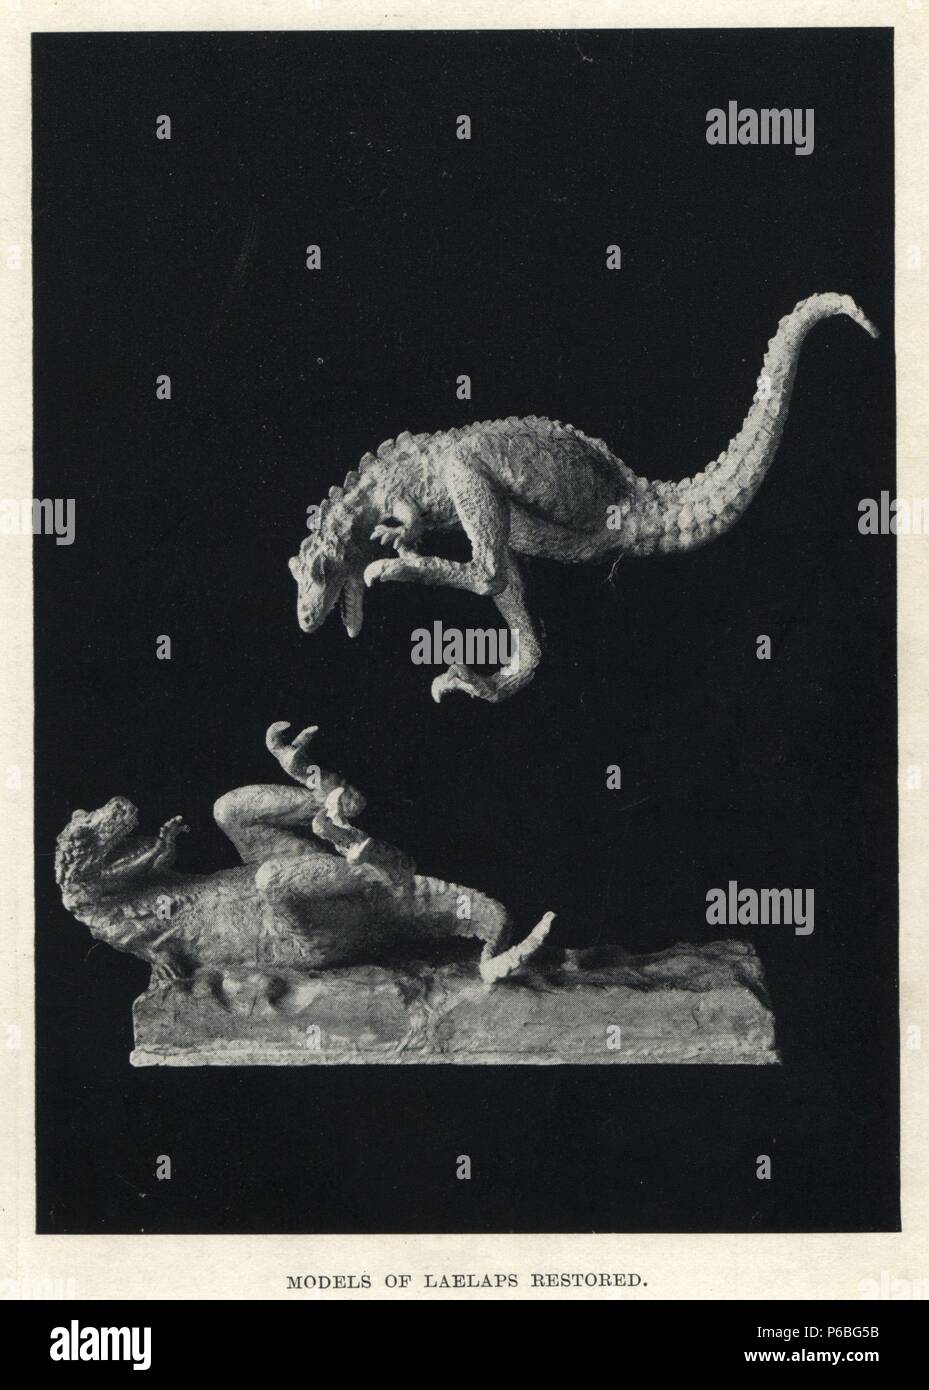 Models of fighting Laelaps, Dryptosaurus aquilunguis, based on Charles R. Knight's illustration. From H. N. Hutchinson's 'Extinct Monsters and Creatures of Other Days,' Chapman and Hall, London, 1897. Stock Photo